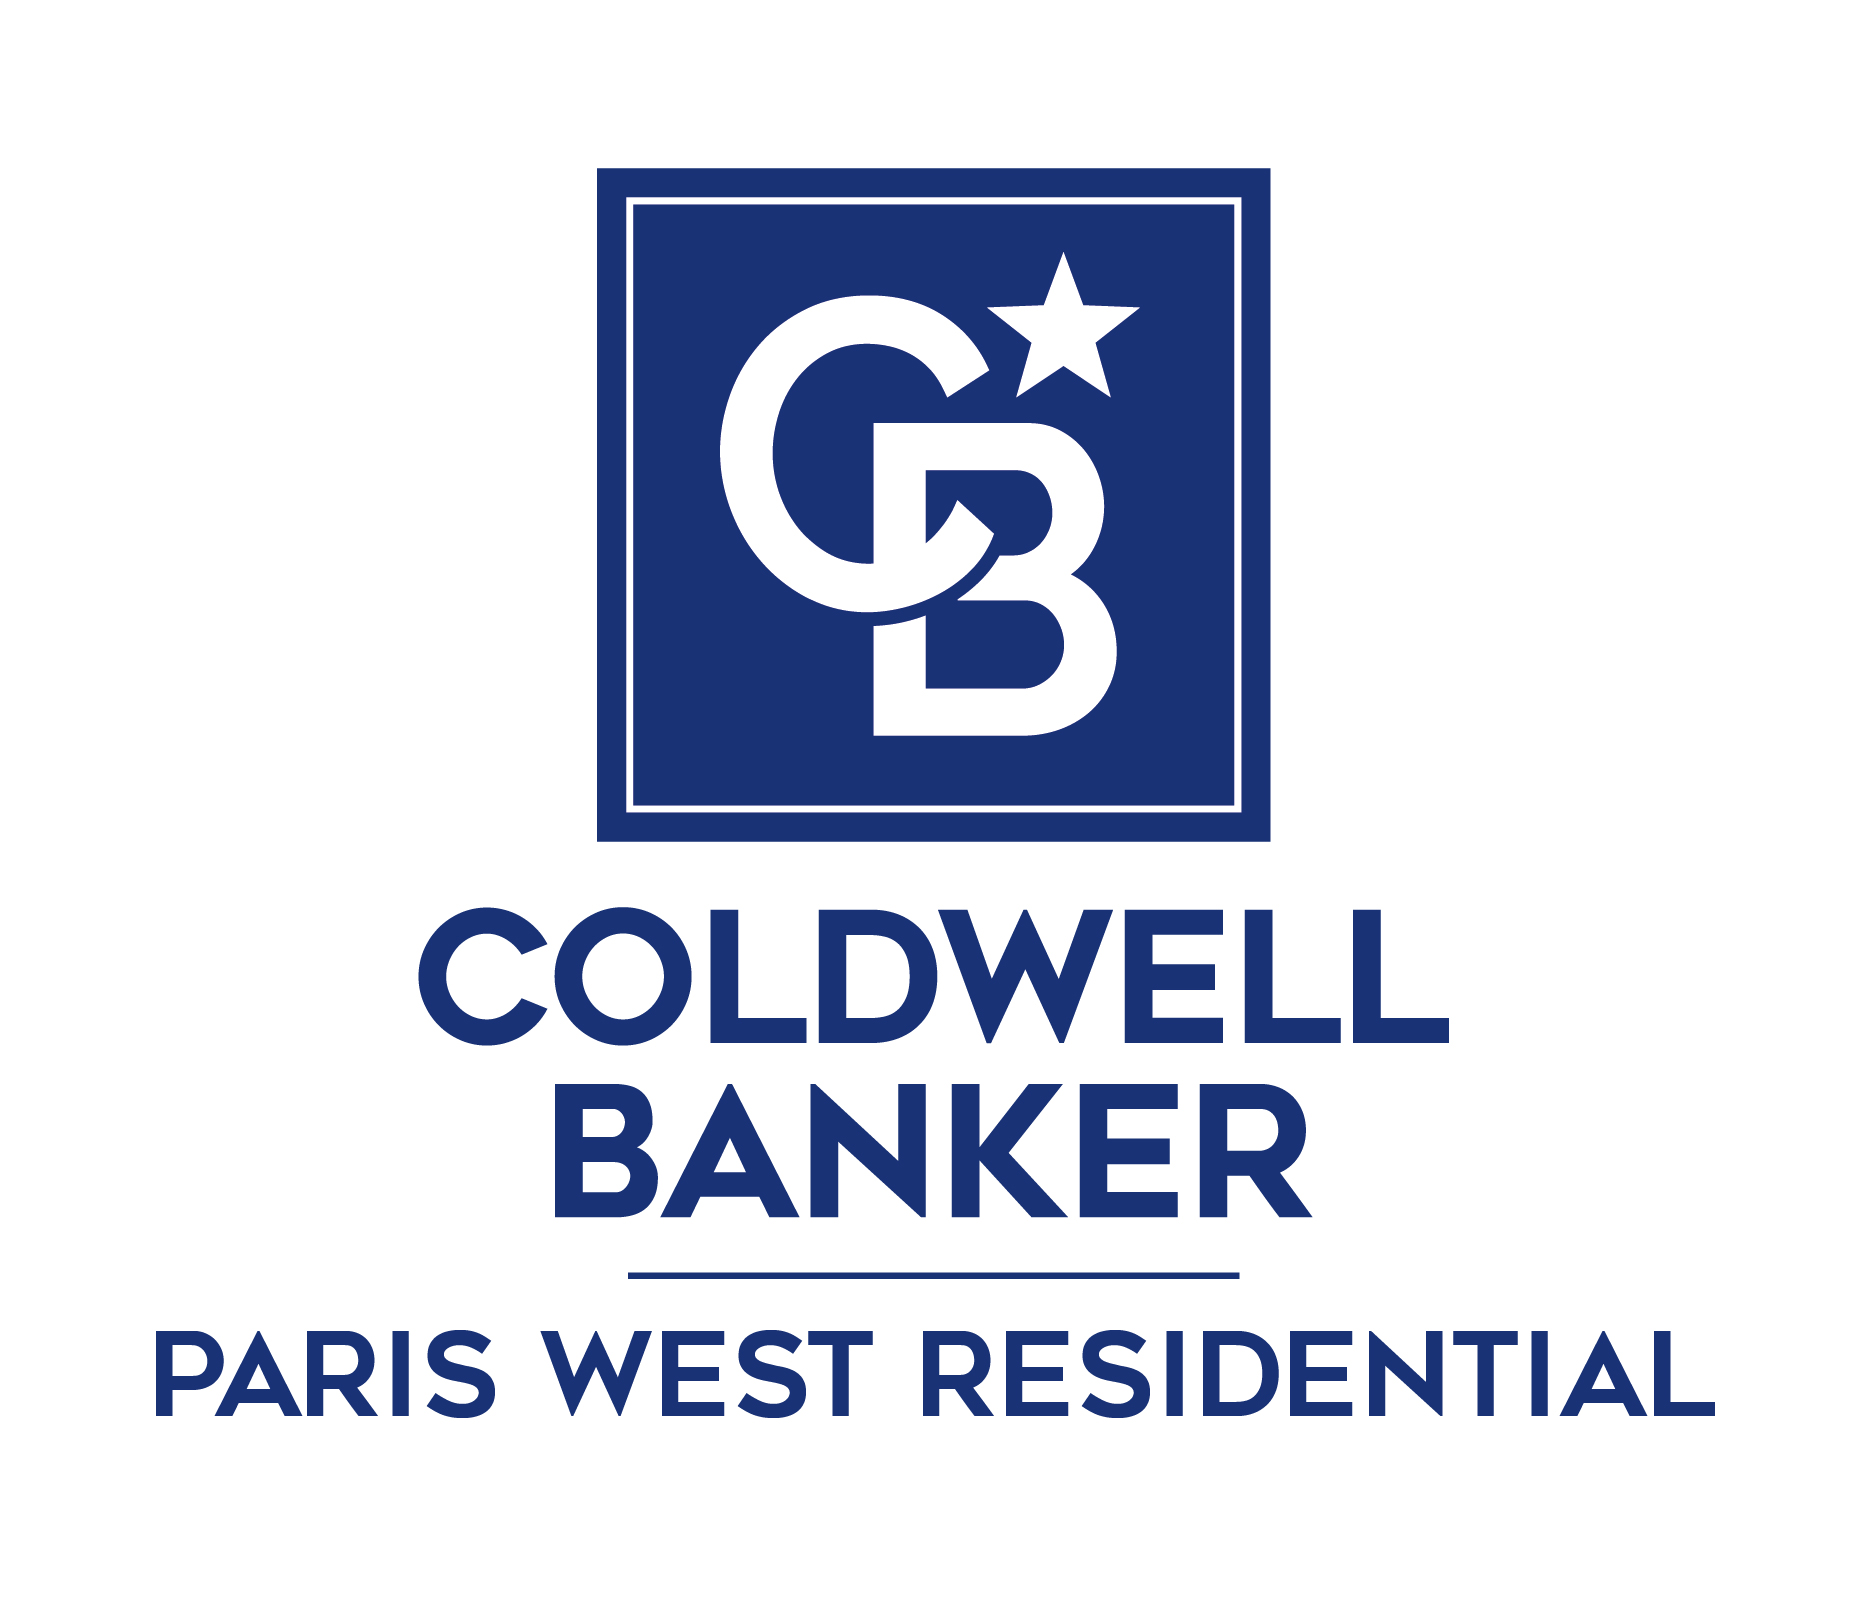 Agence Coldwell Banker Paris West Residential 